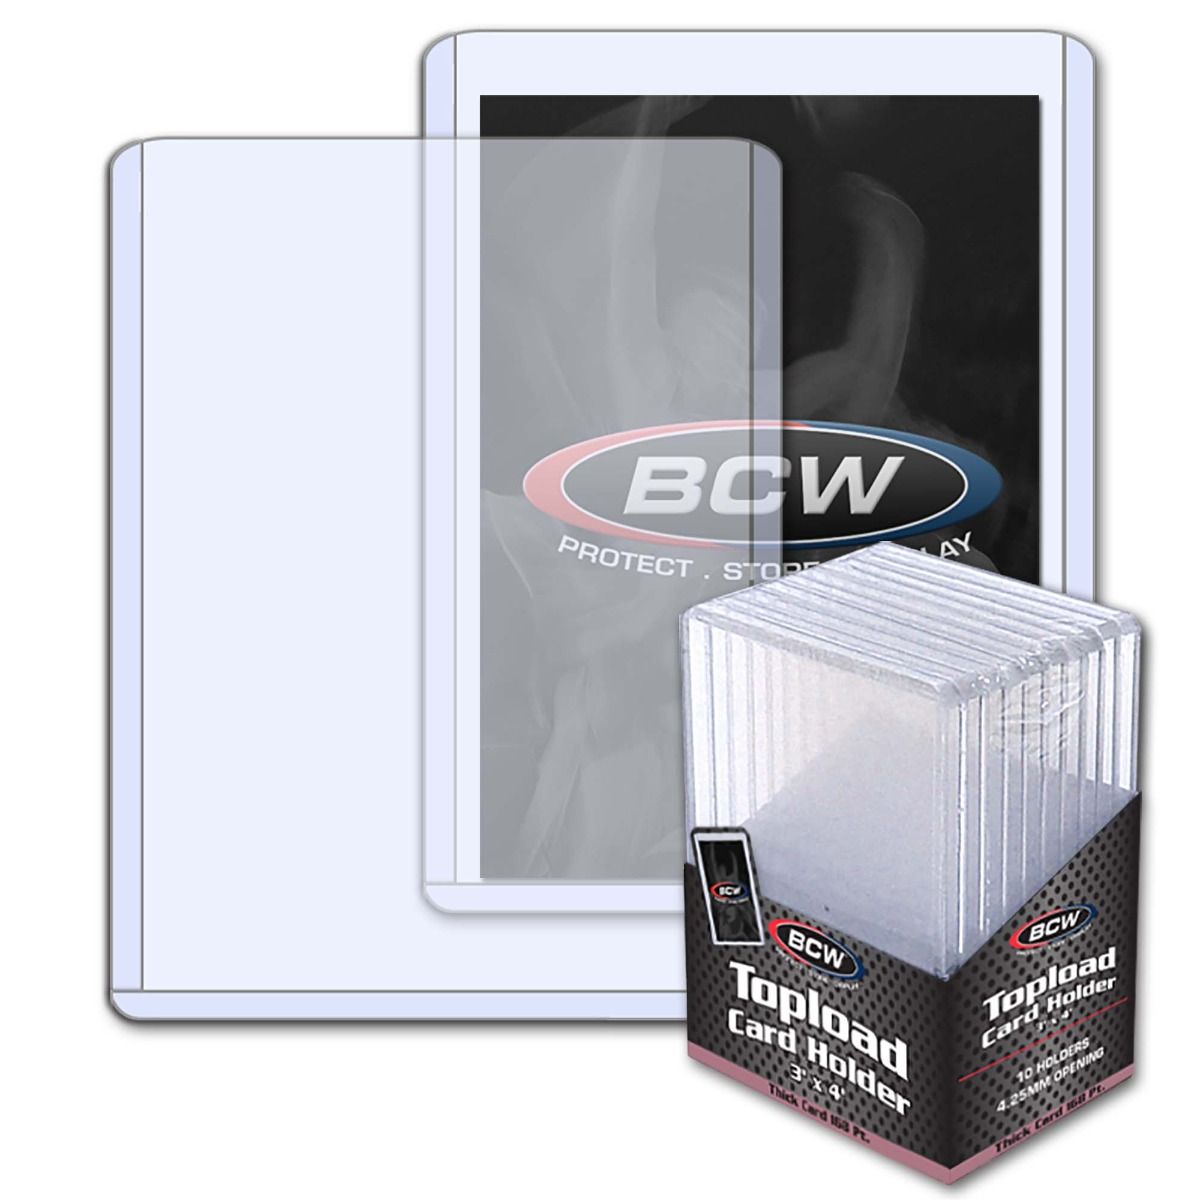 BCW Topload Card Holder 3x4 4.25mm